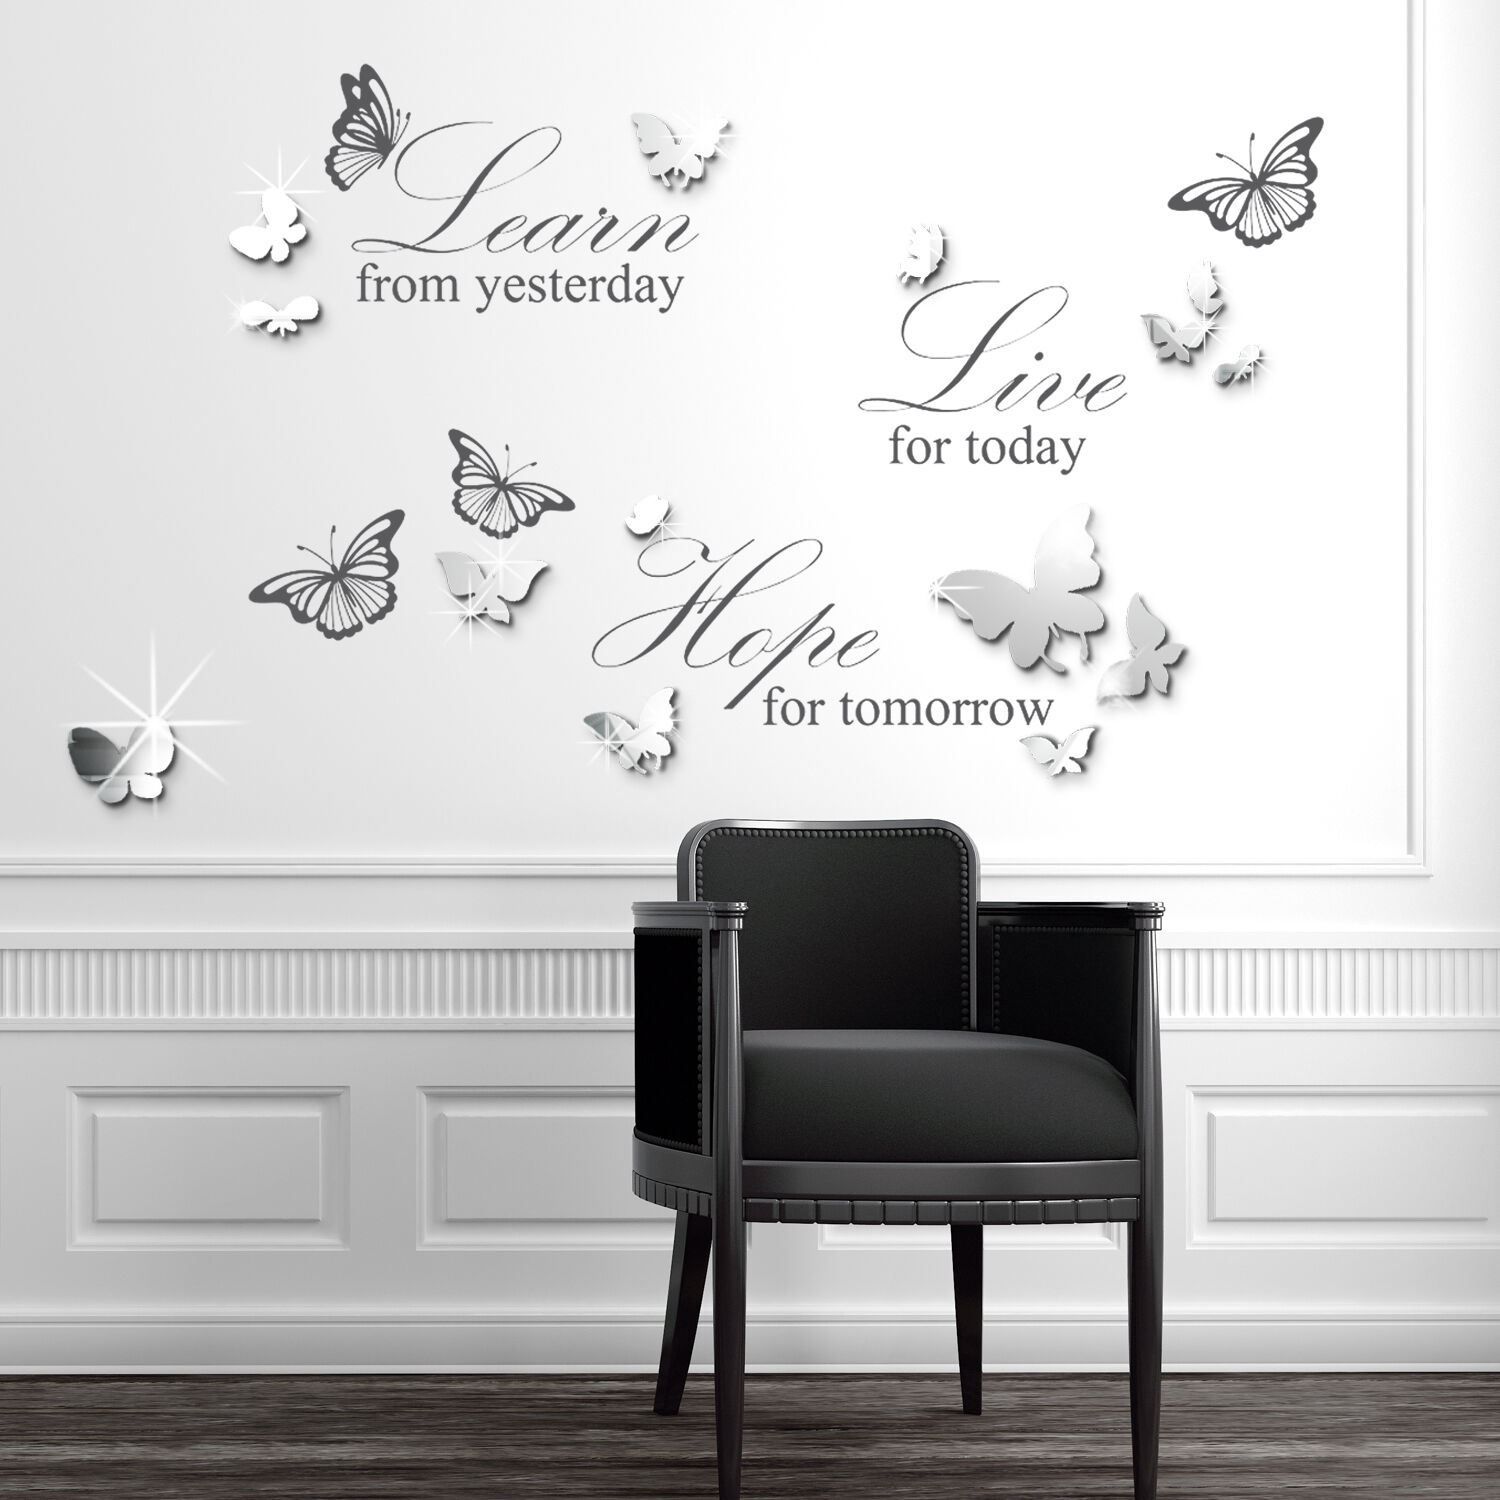 - Transform your room with the stunning Walplus wall sticker collection.
- Walplus' high quality self-adhesive stickers are quick to apply, and can be easily removed and repositioned without damage.
- Simply peel and stick to any smooth, even surface.
- Application instructions included; Eco-friendly materials and Non-toxic.